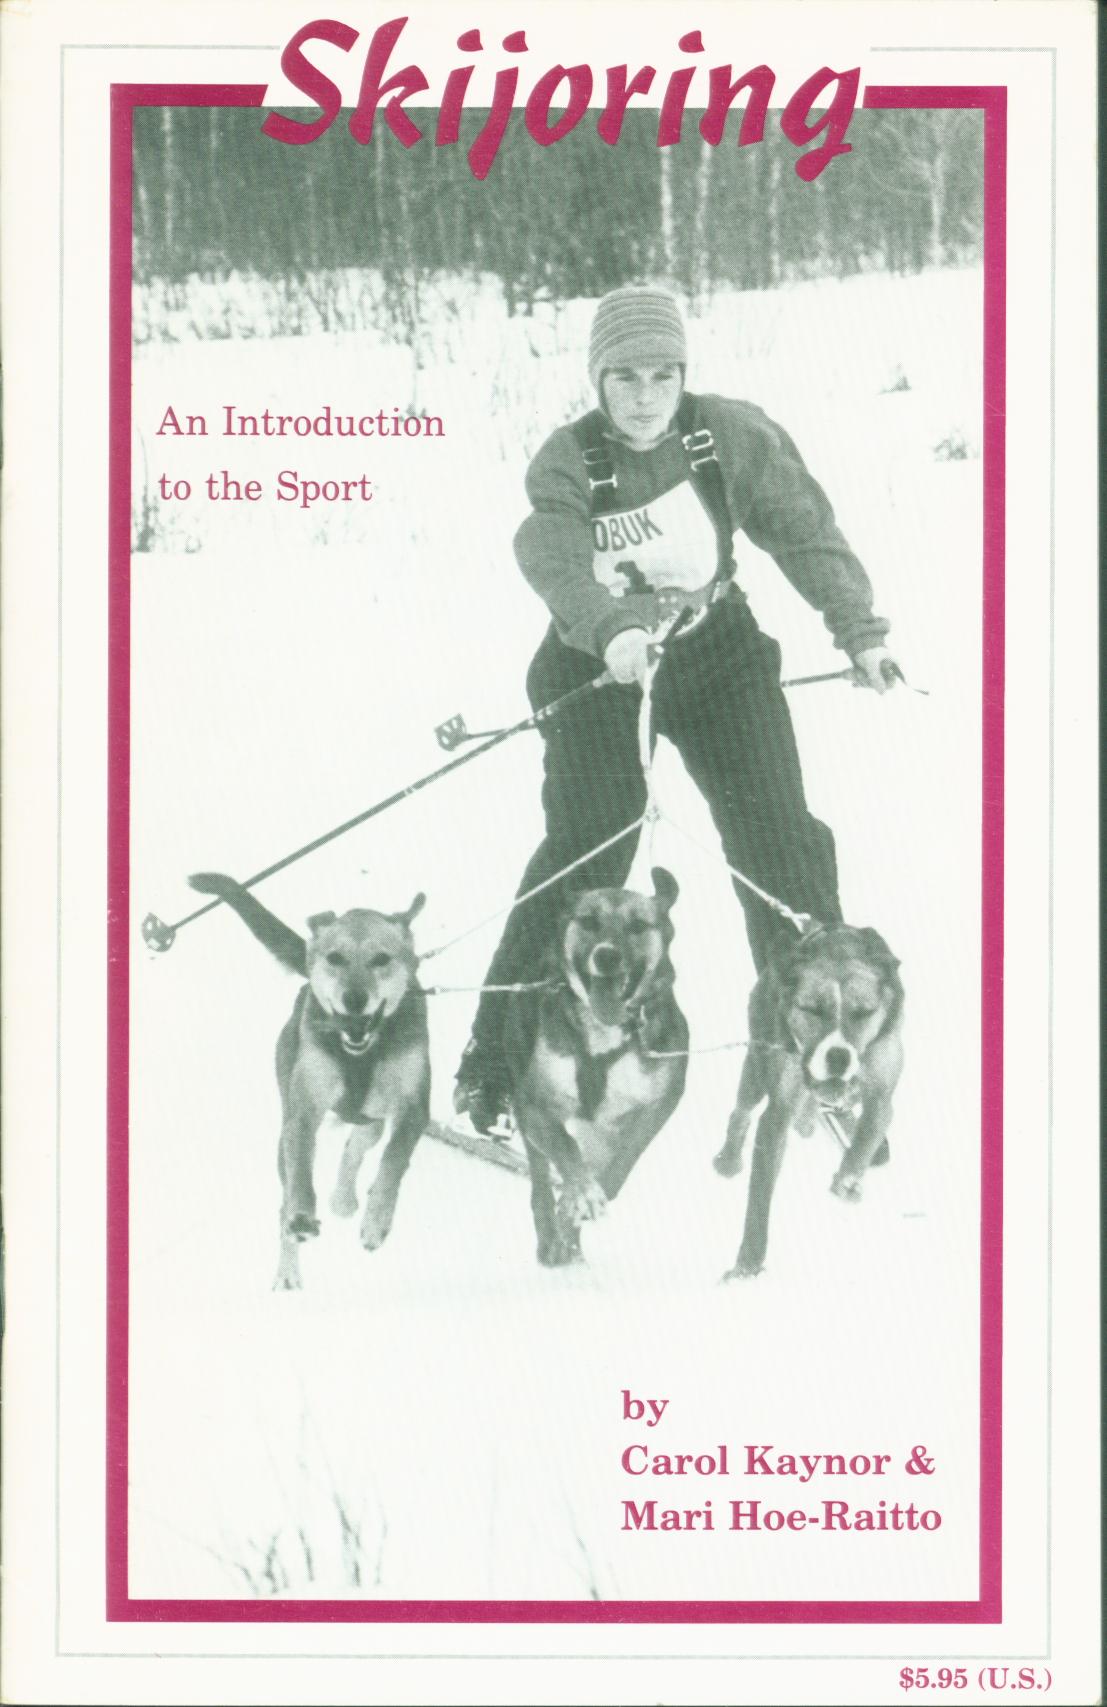 SKIJORING: an introduction to the sport.